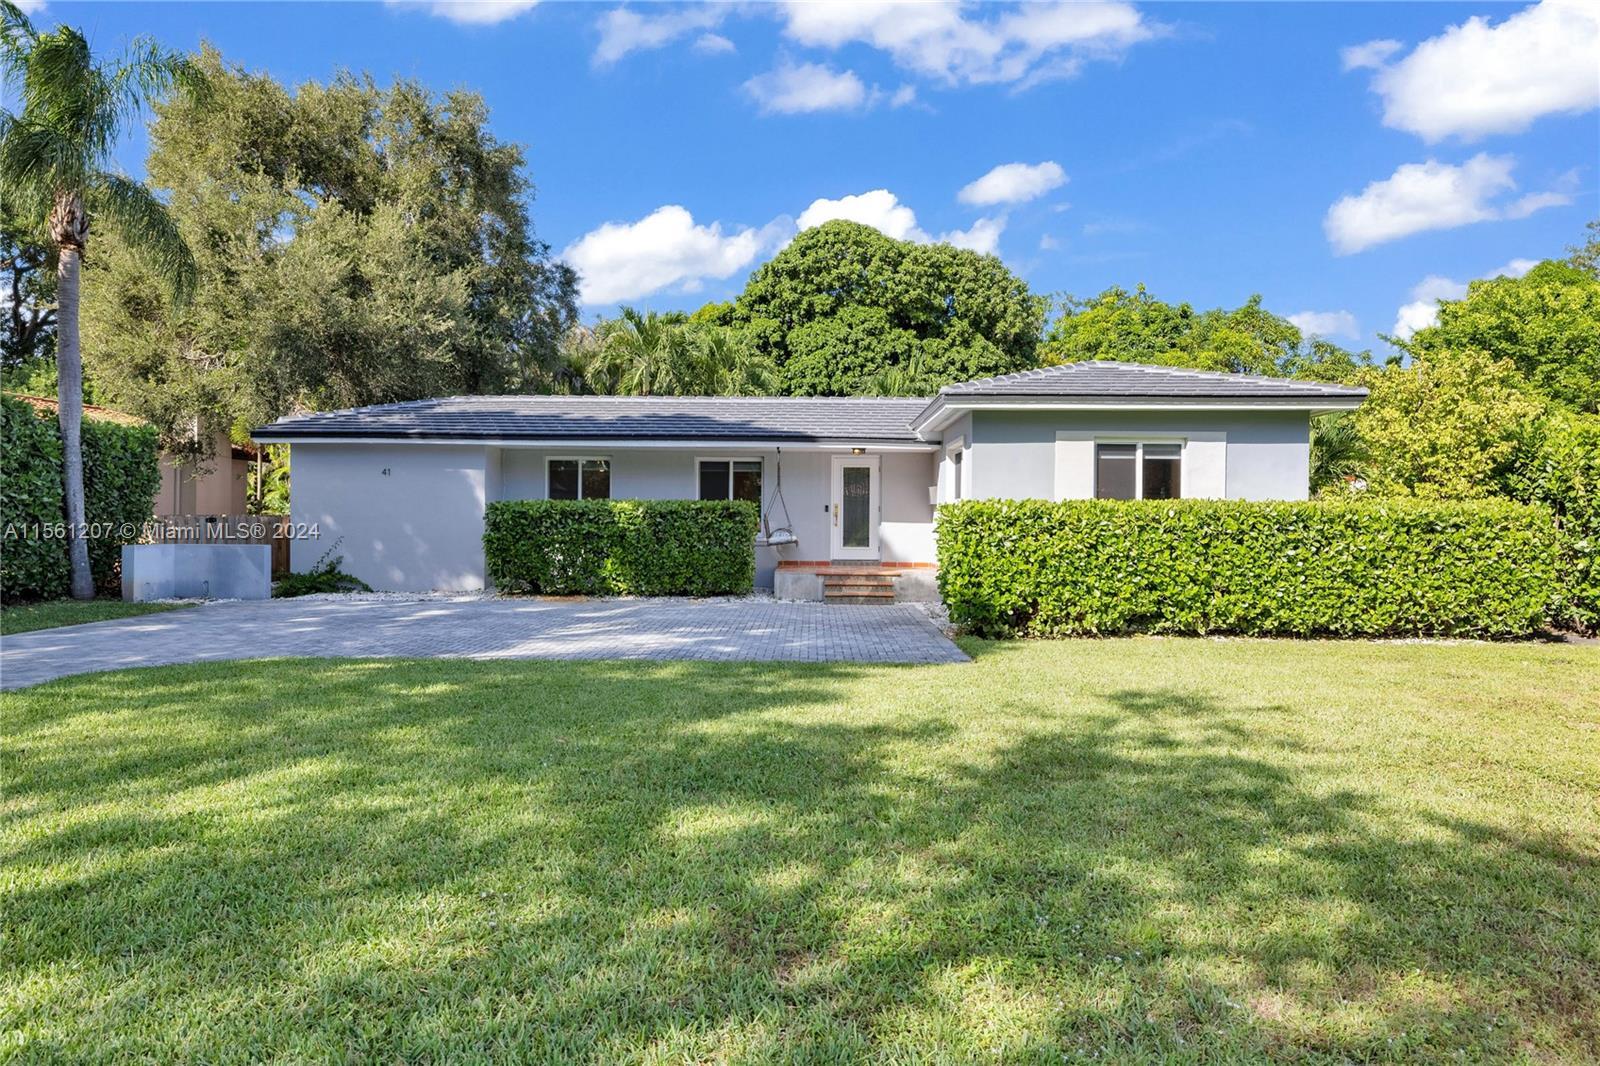 Photo of 41 NW 102nd St in Miami Shores, FL